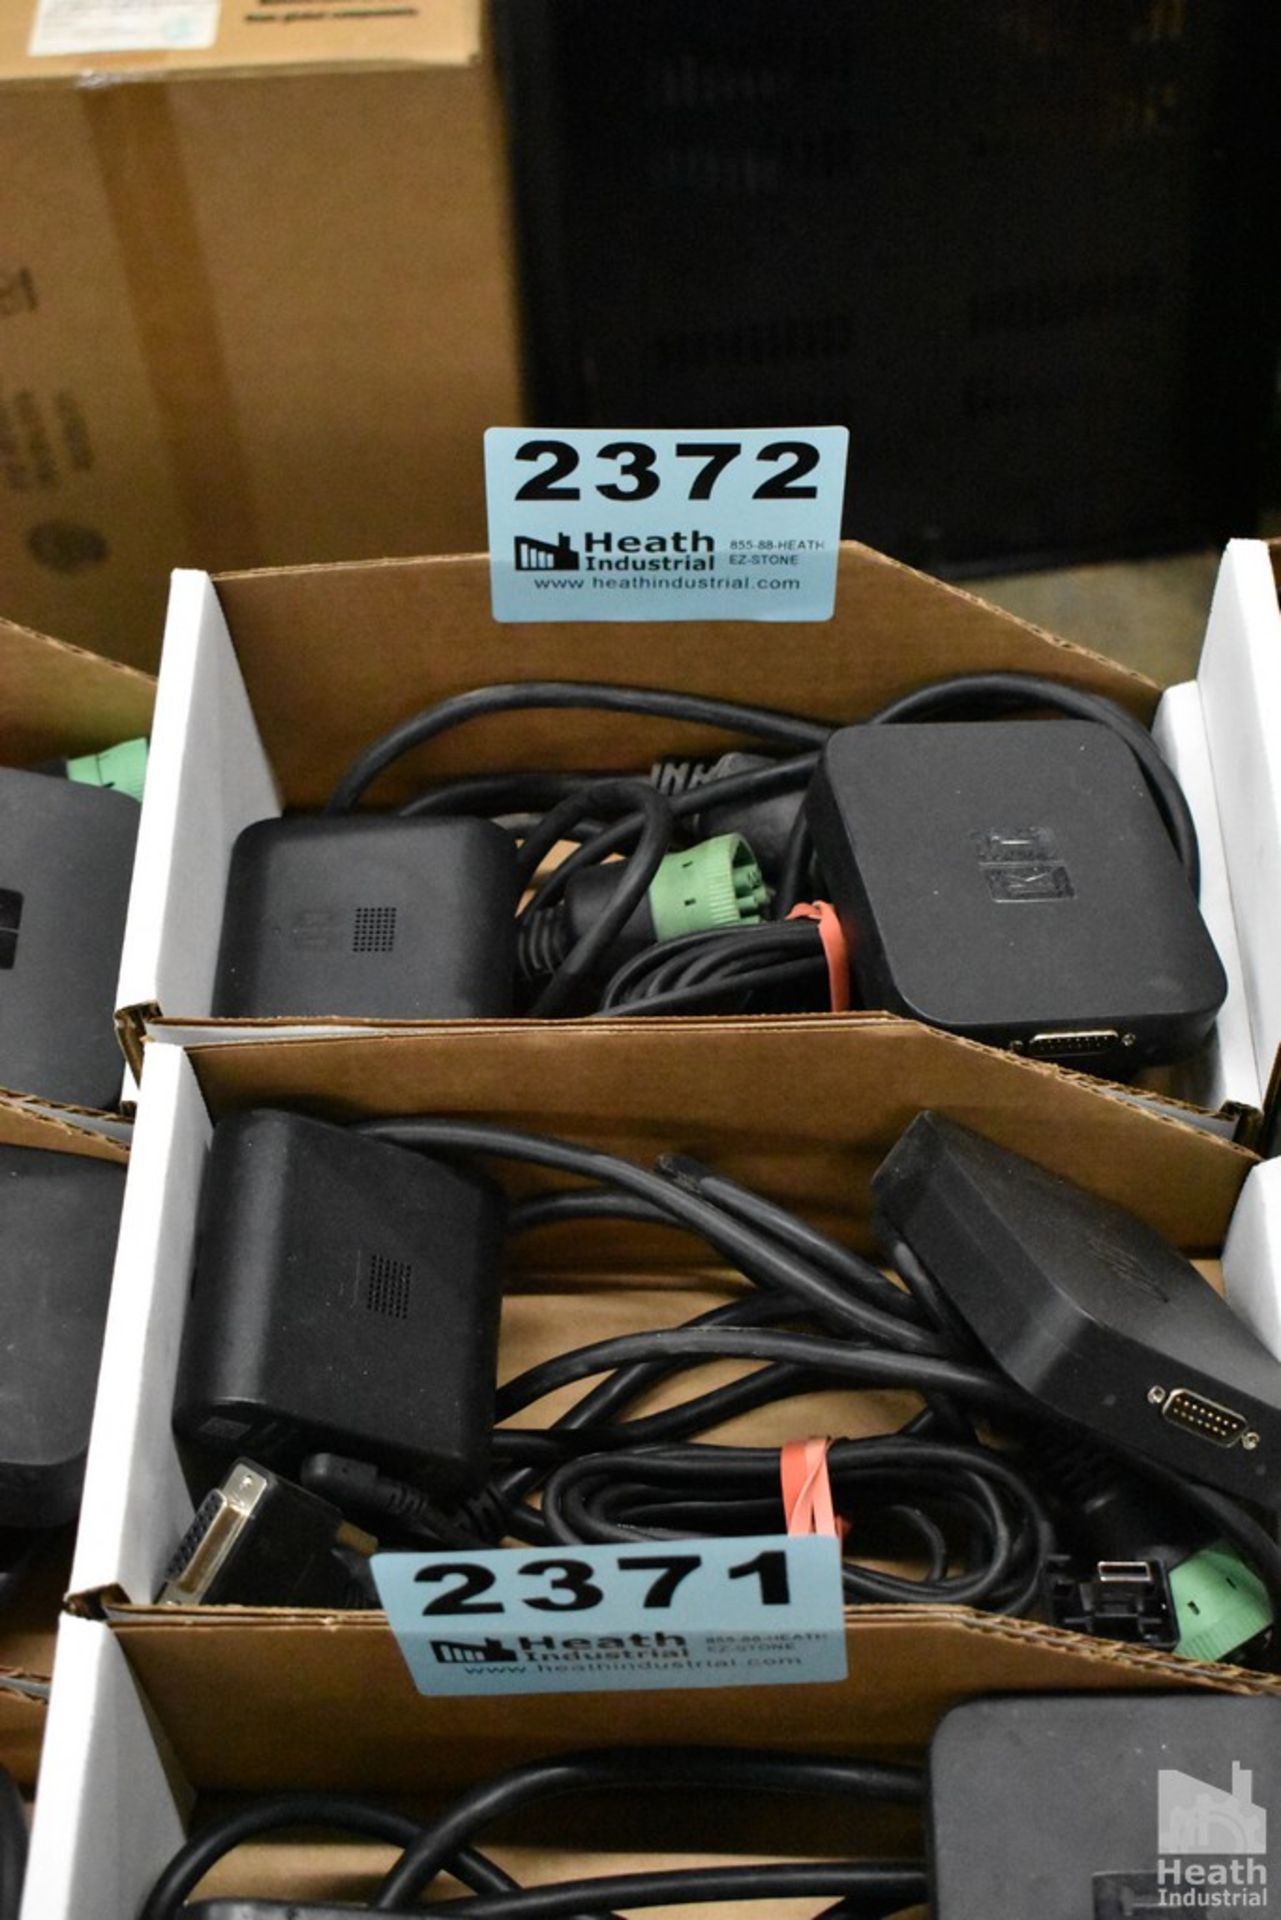 KEEP TRUCKIN MODEL LBB-3.5CA DASHCAM AND TRACKER IN TWO BOXES